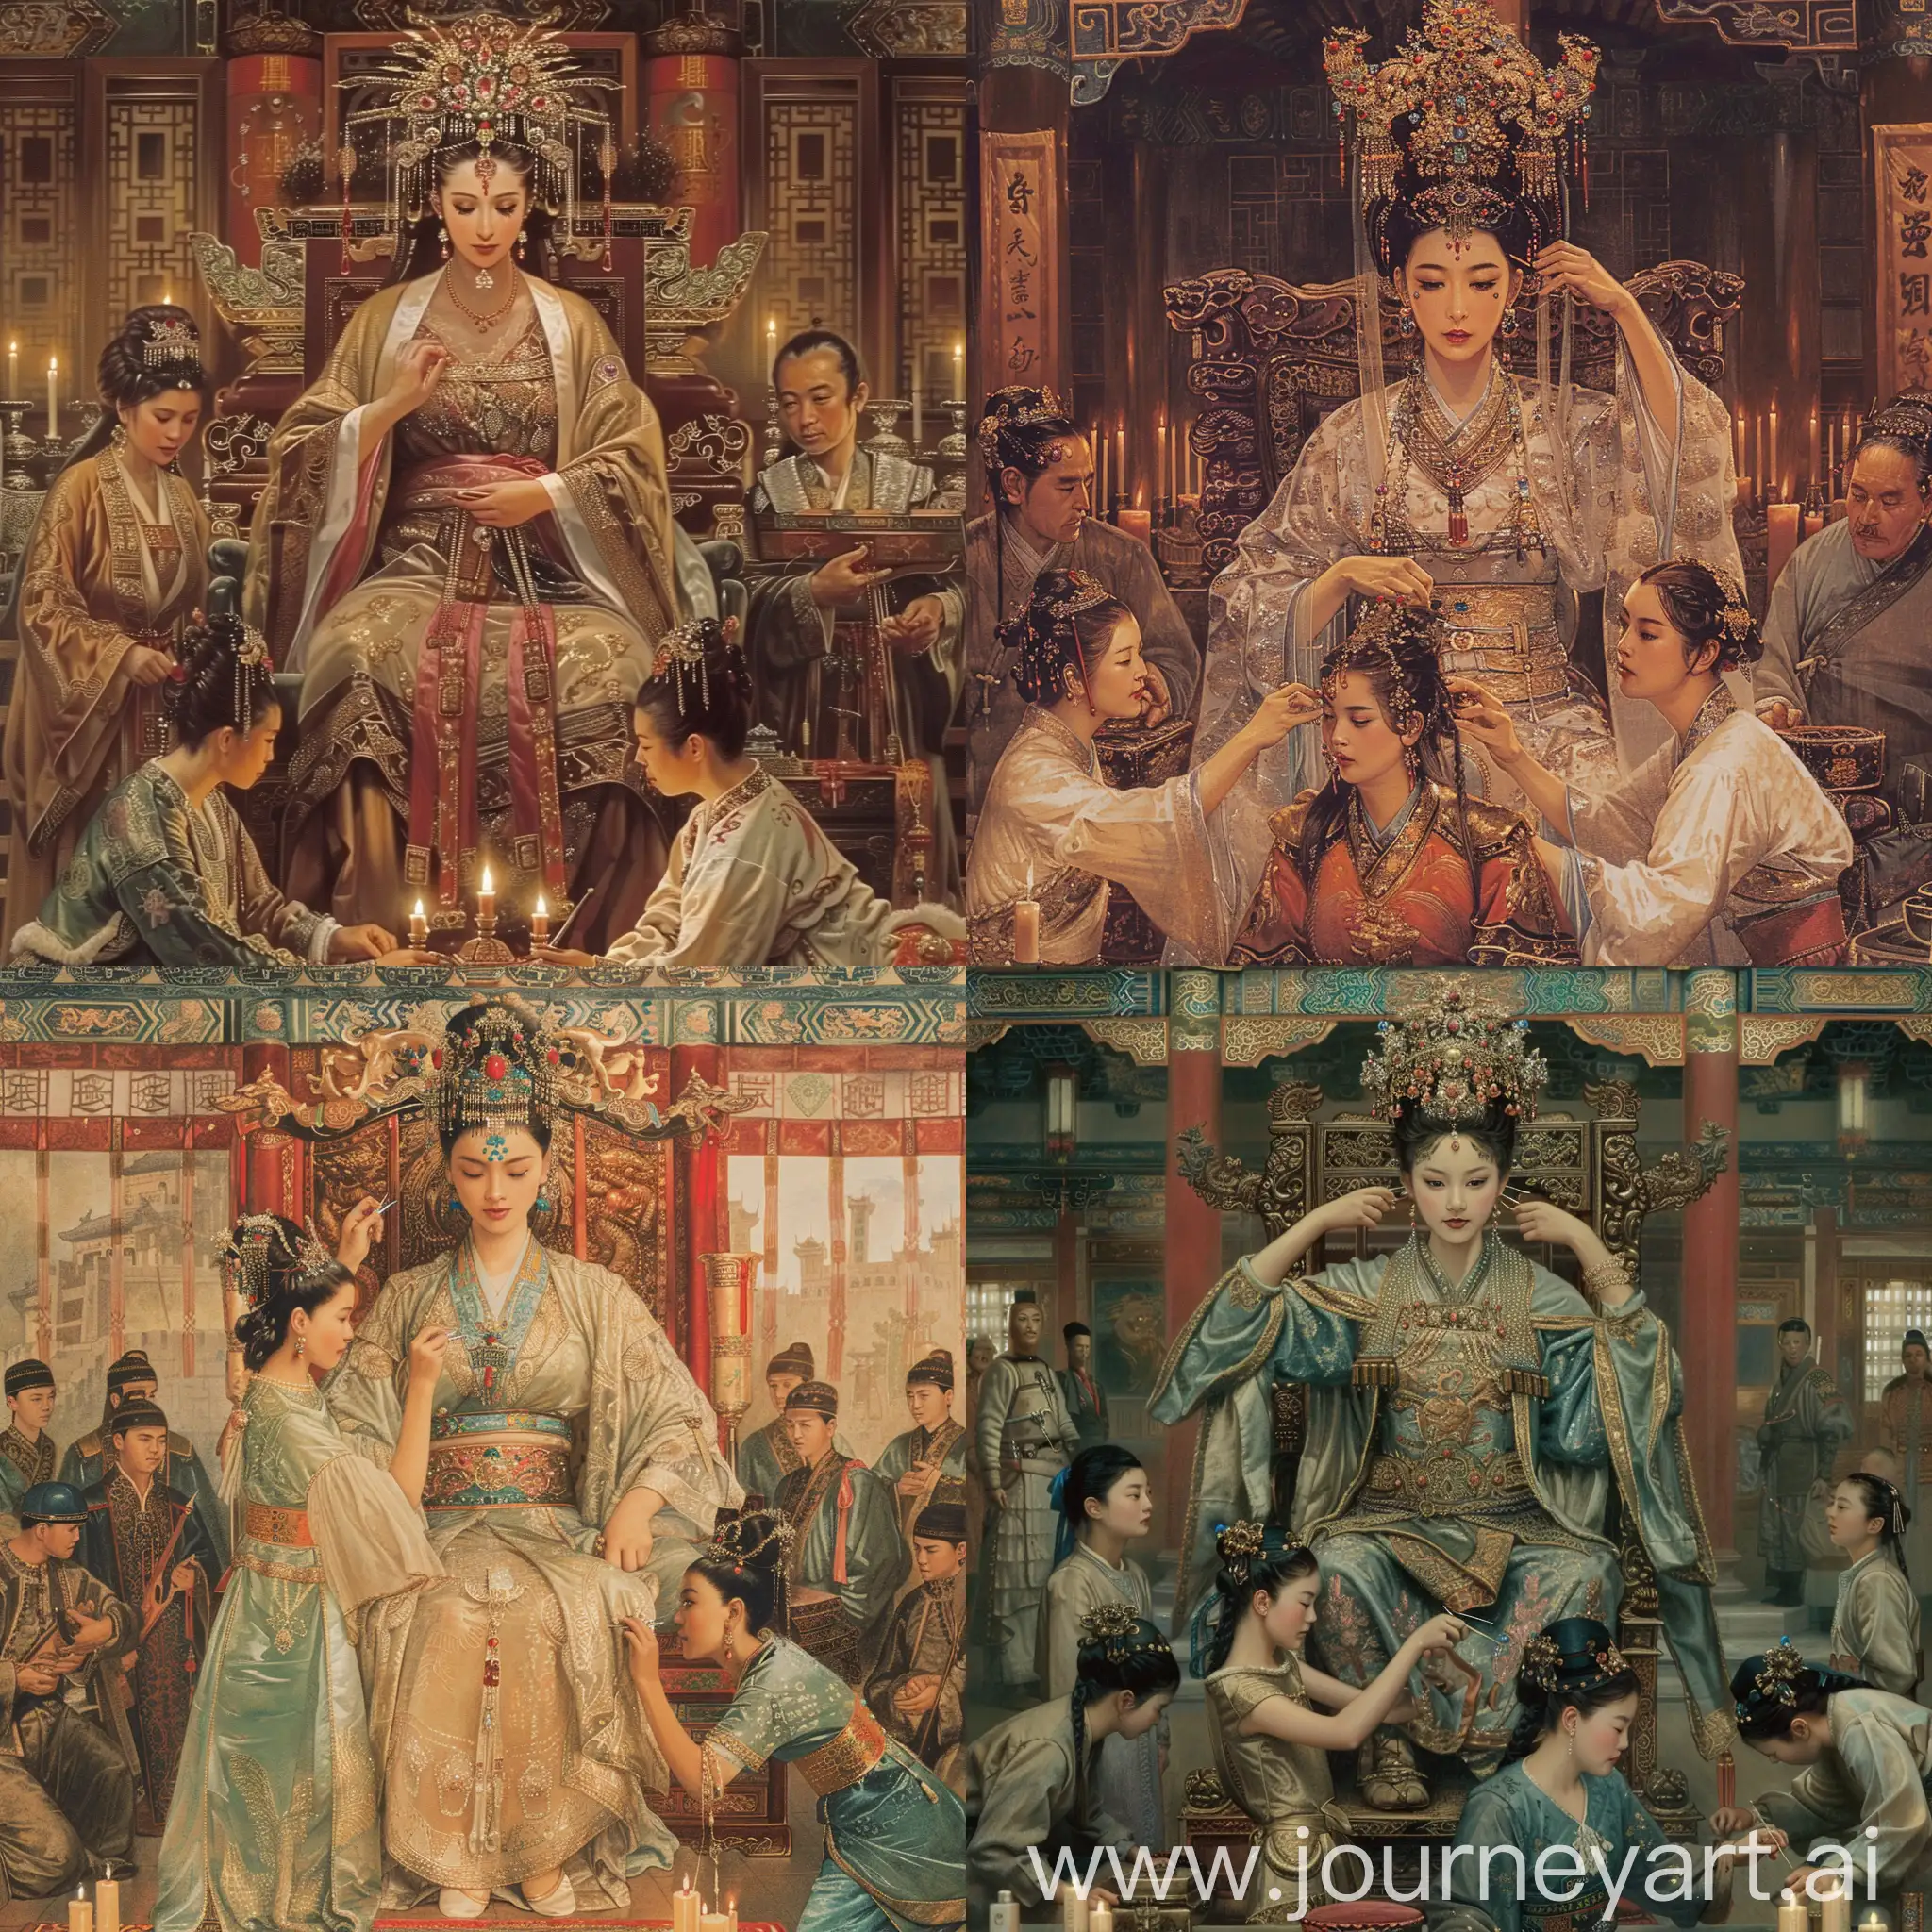 Luxurious-Attire-Chinese-Empress-Adorned-by-Palace-Maid-Amidst-Officials-Reverence